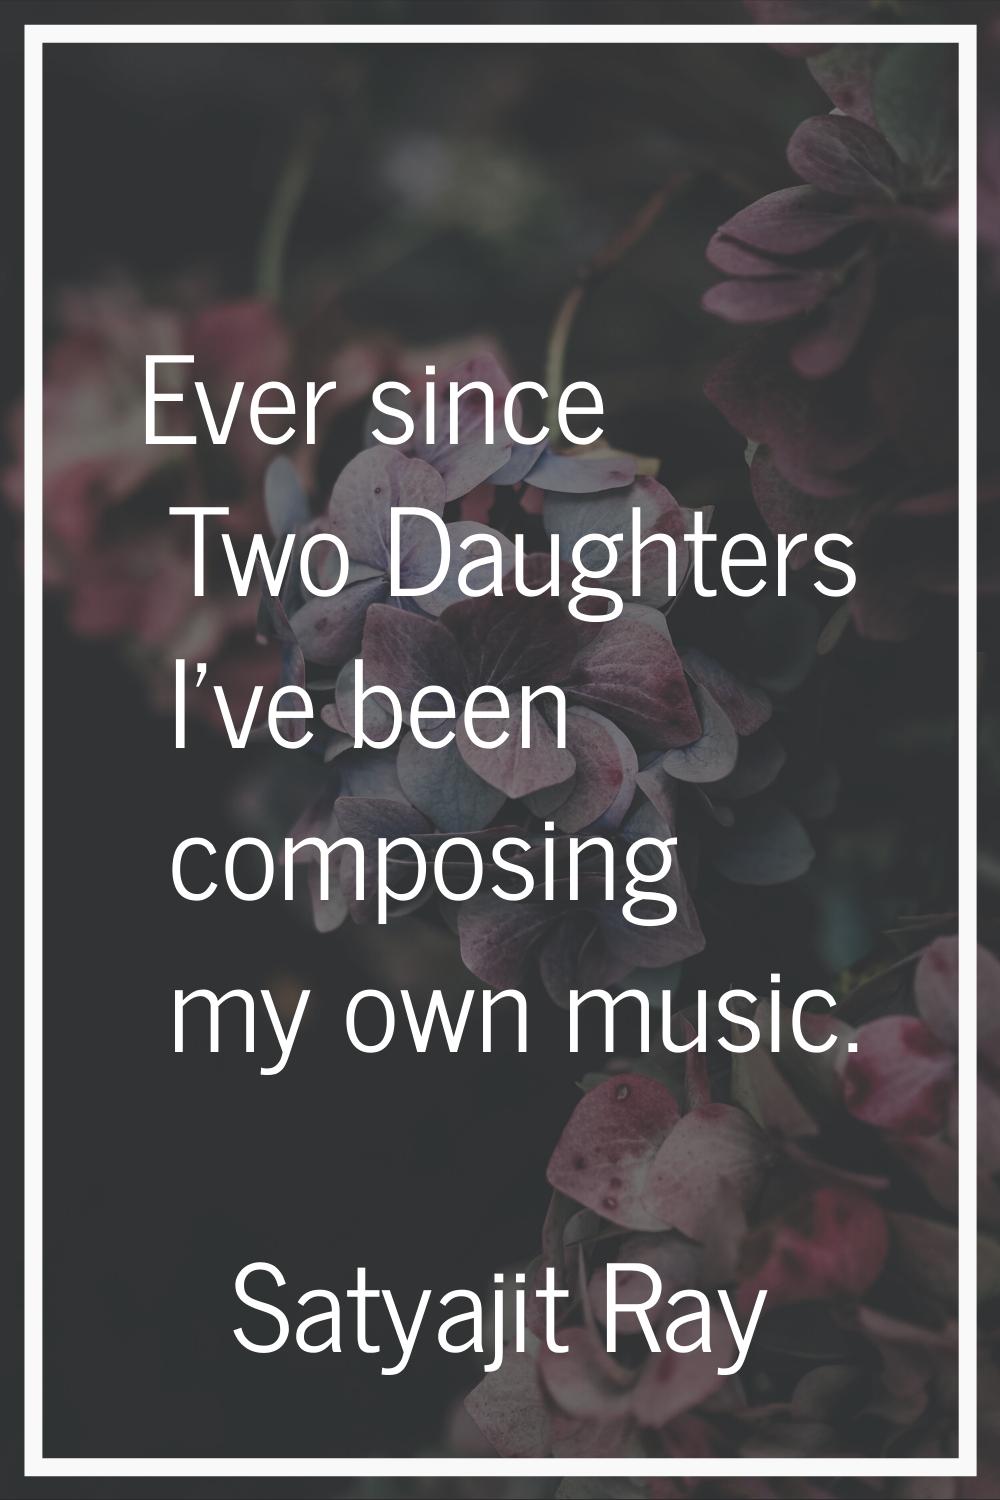 Ever since Two Daughters I've been composing my own music.